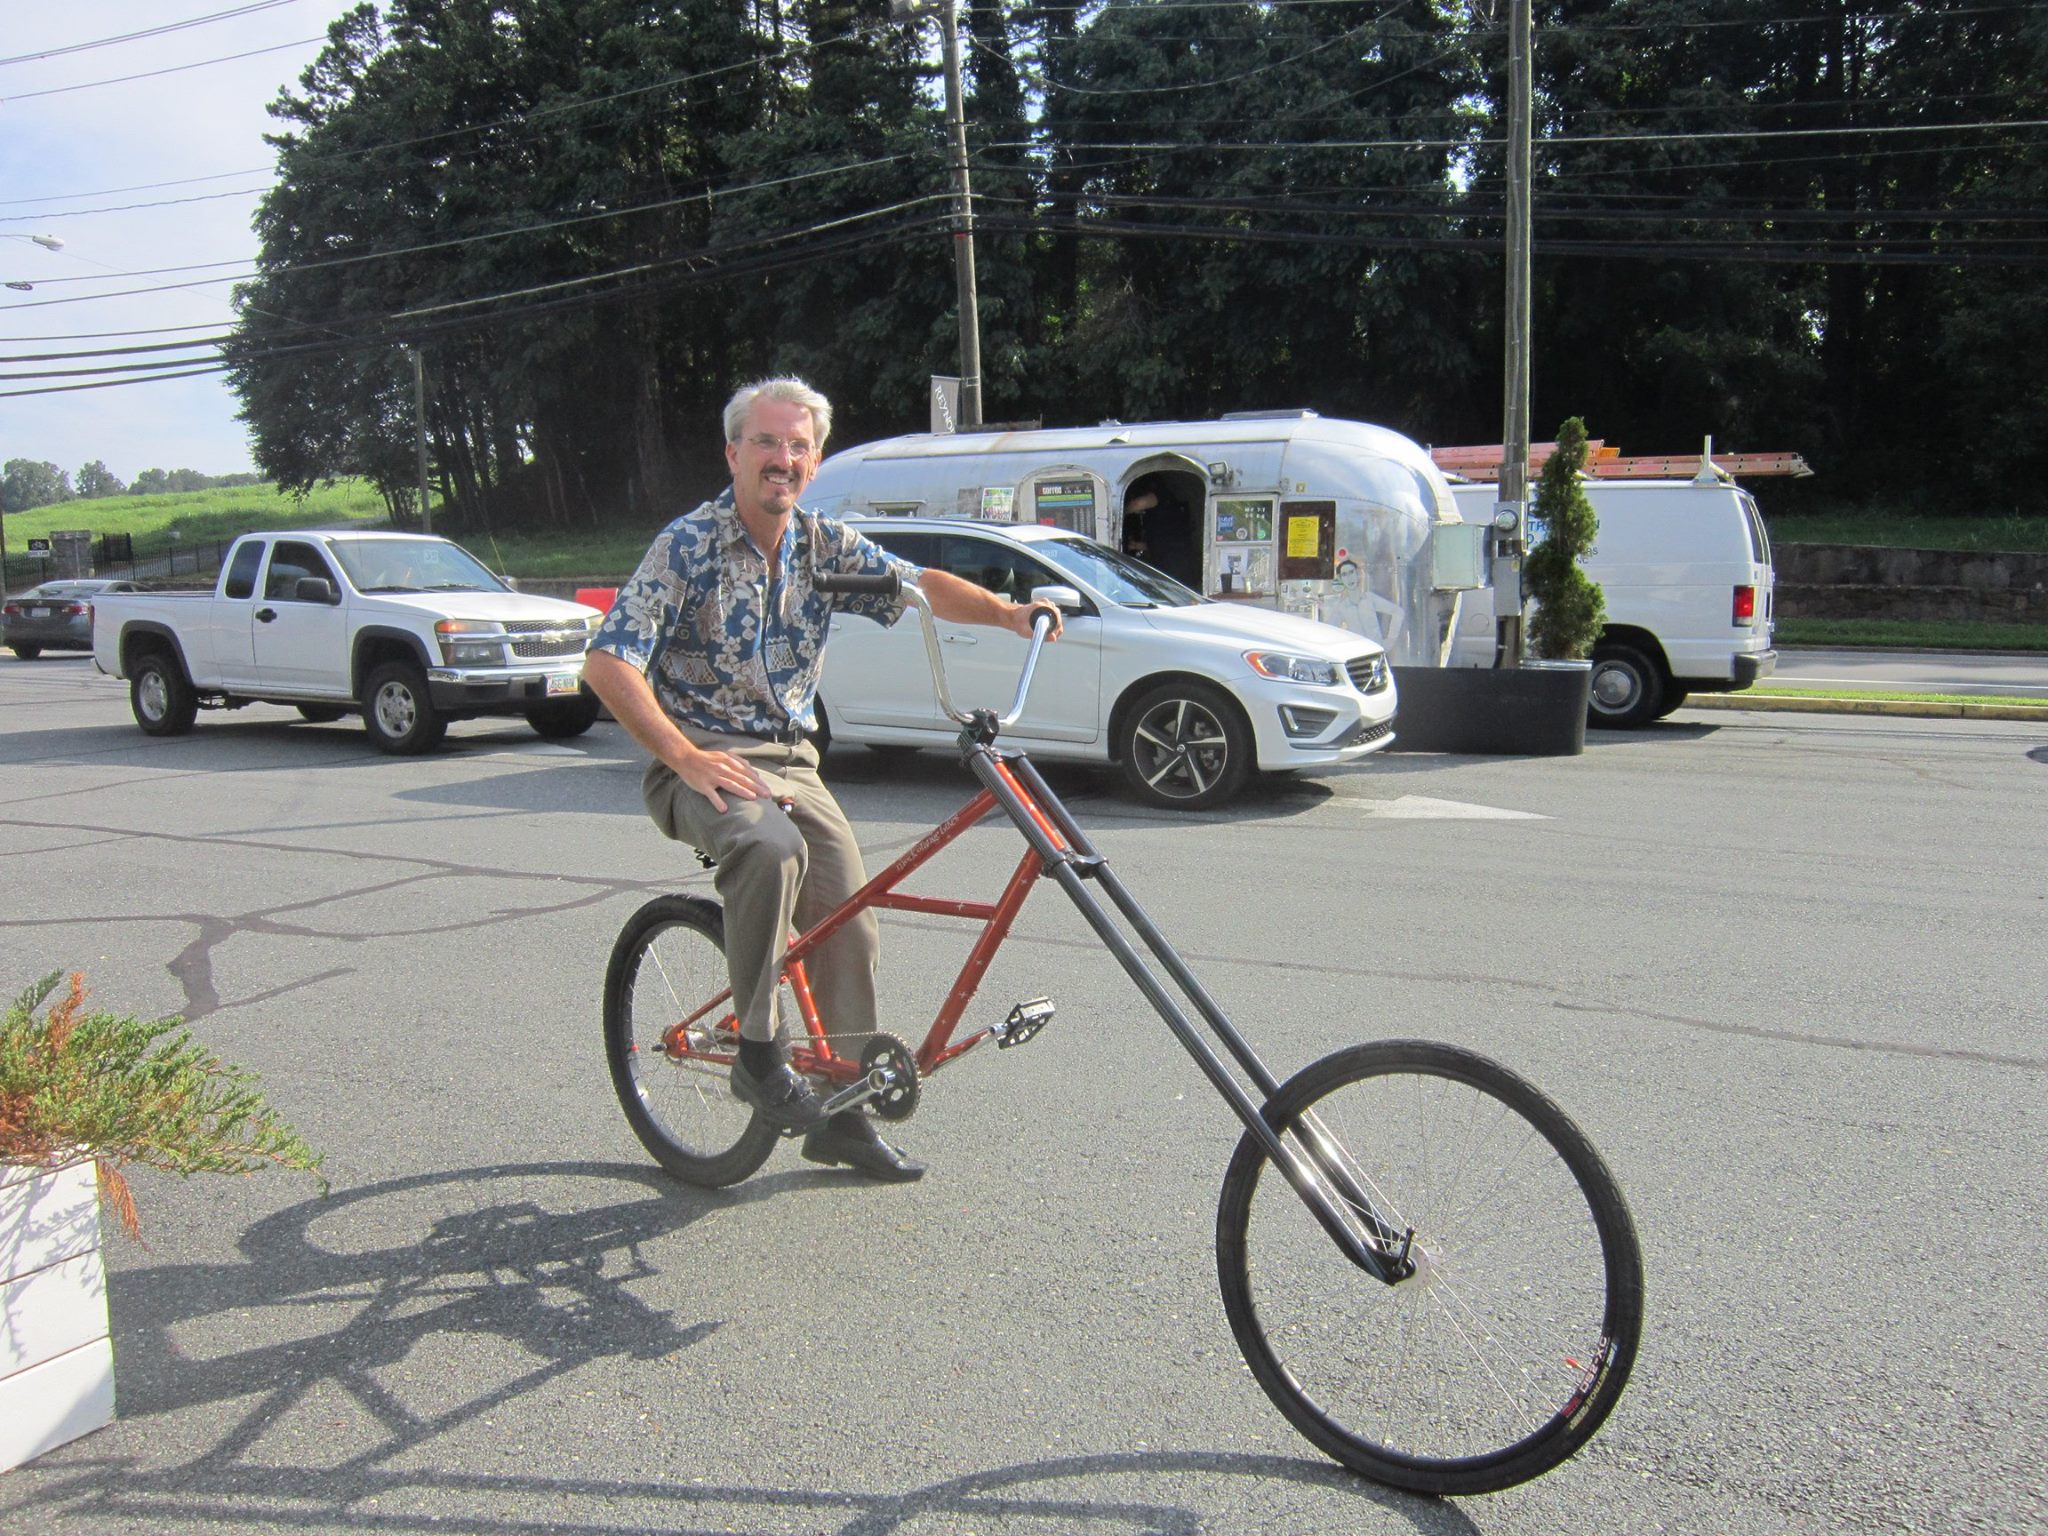 Our friend Doug Meis (The Bicycle Accident Attorney) on the Mock Orange Bikes Chopper. Doug rode the chopper like a pro. Looking Good!